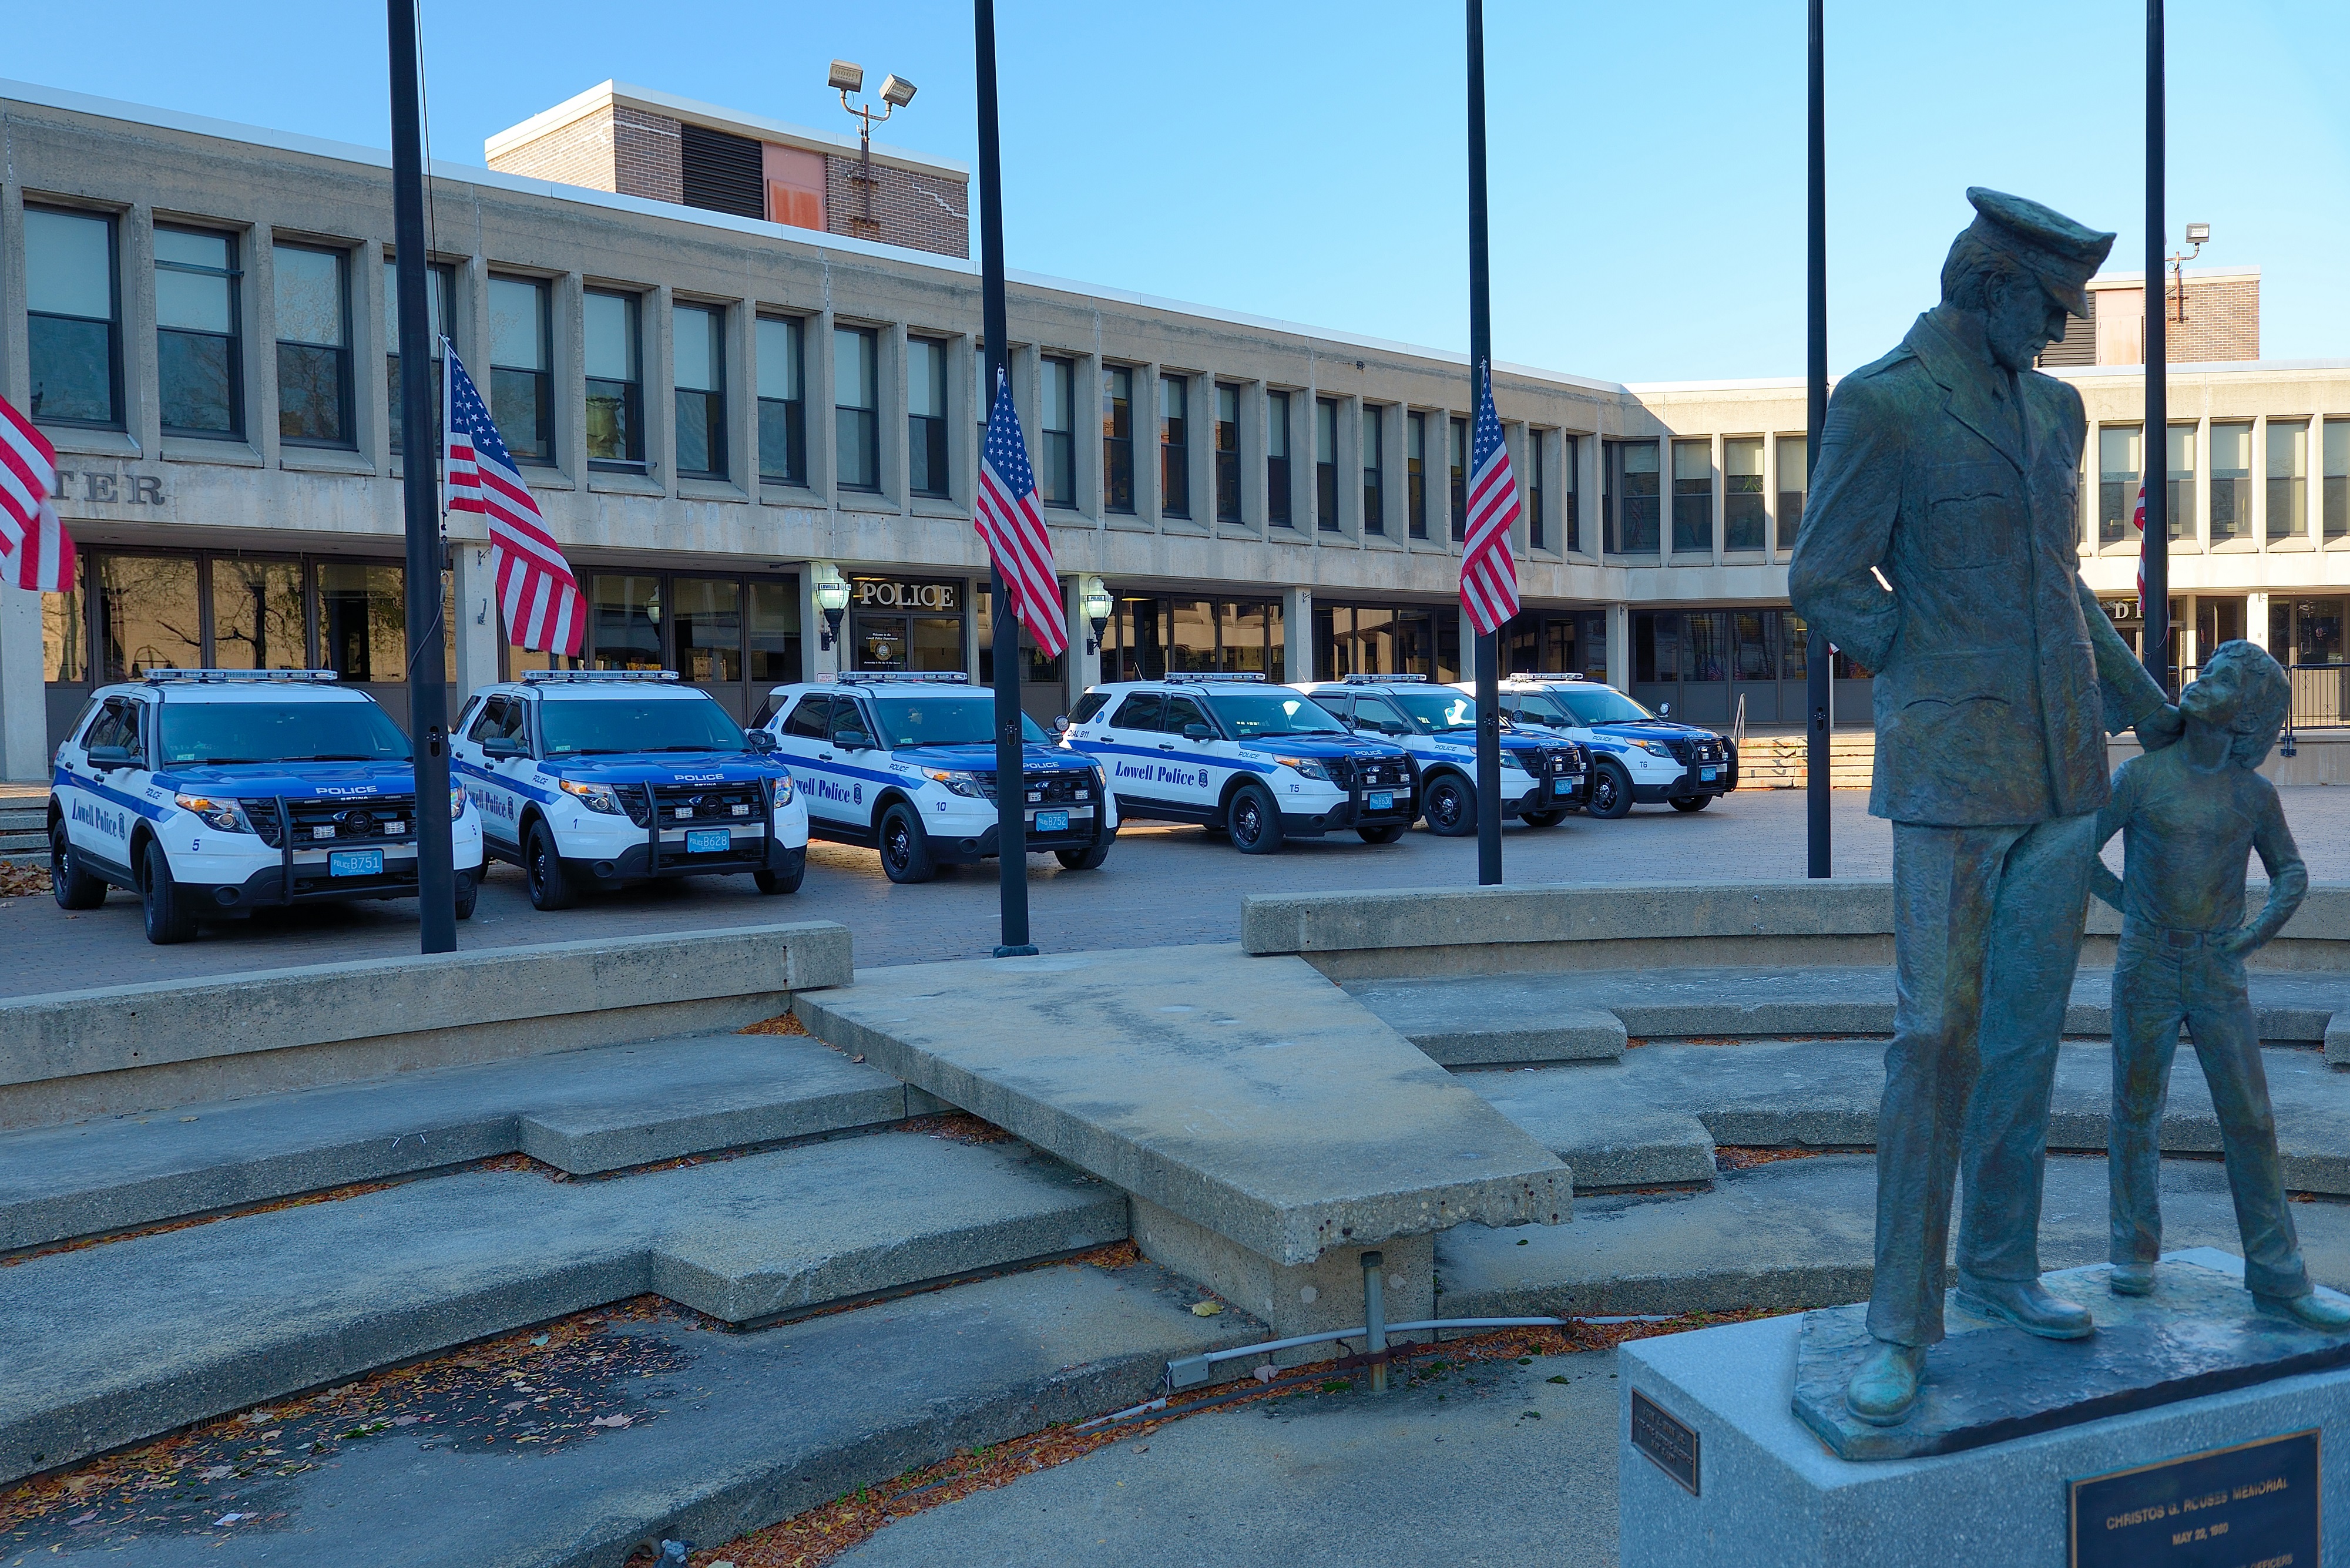 Lowell Police Department building and cars